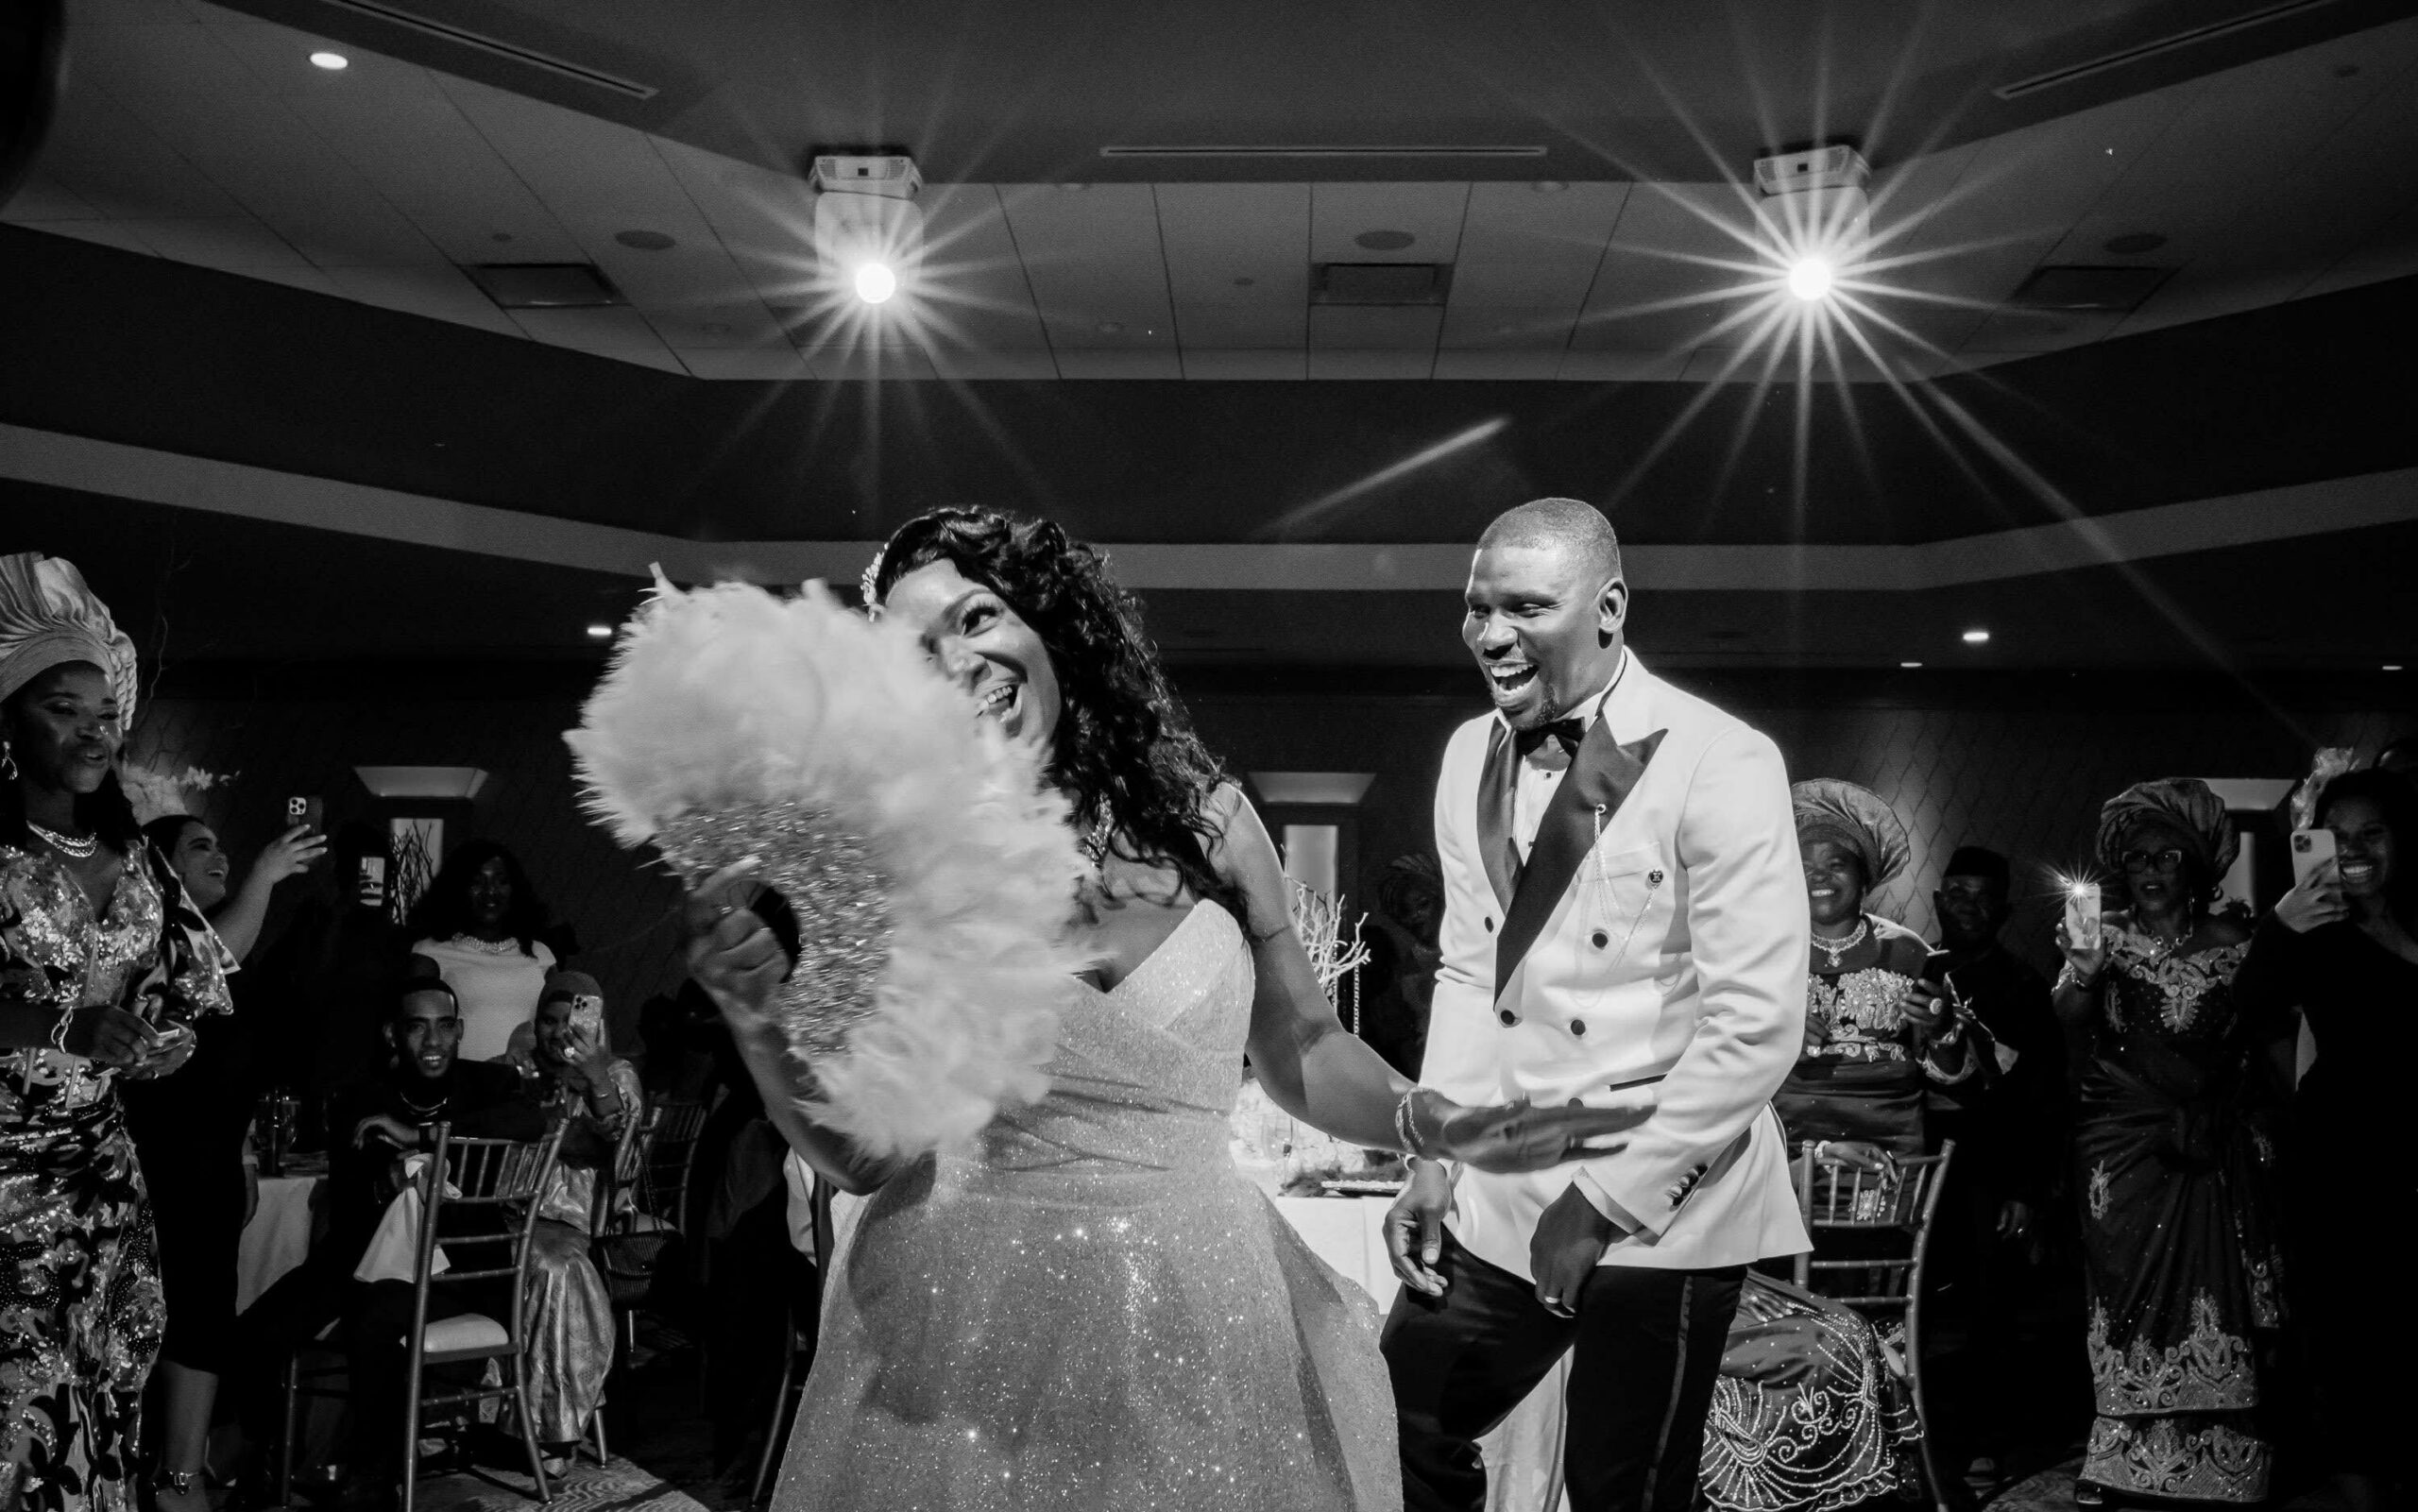 Wedding Reception Dance Bride Groom Guests Share Moment